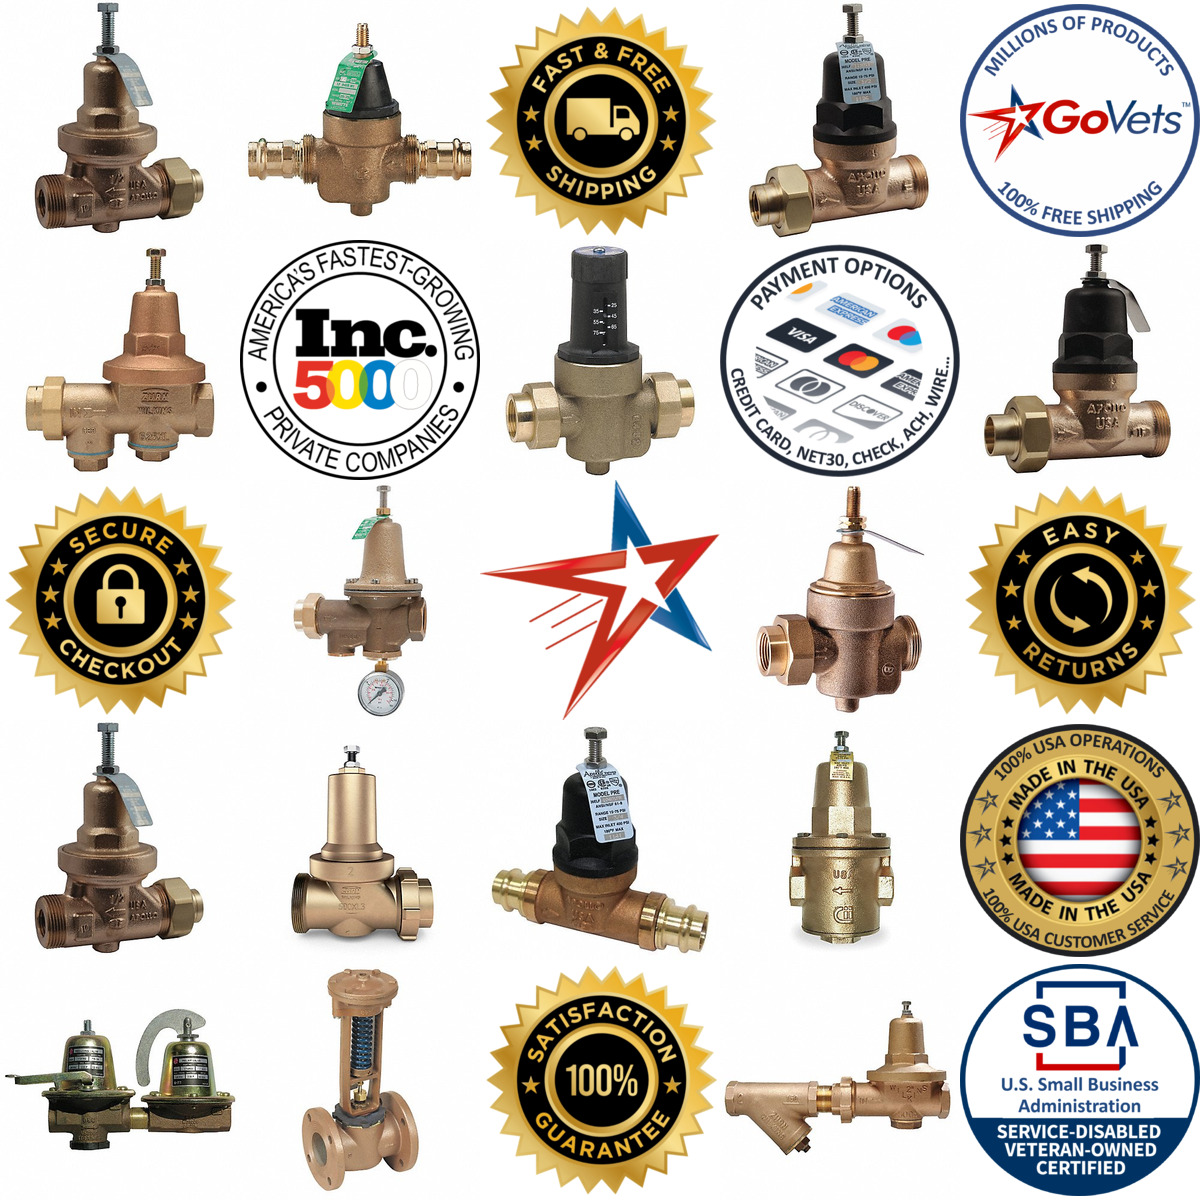 A selection of Water Pressure Reducing Valves products on GoVets